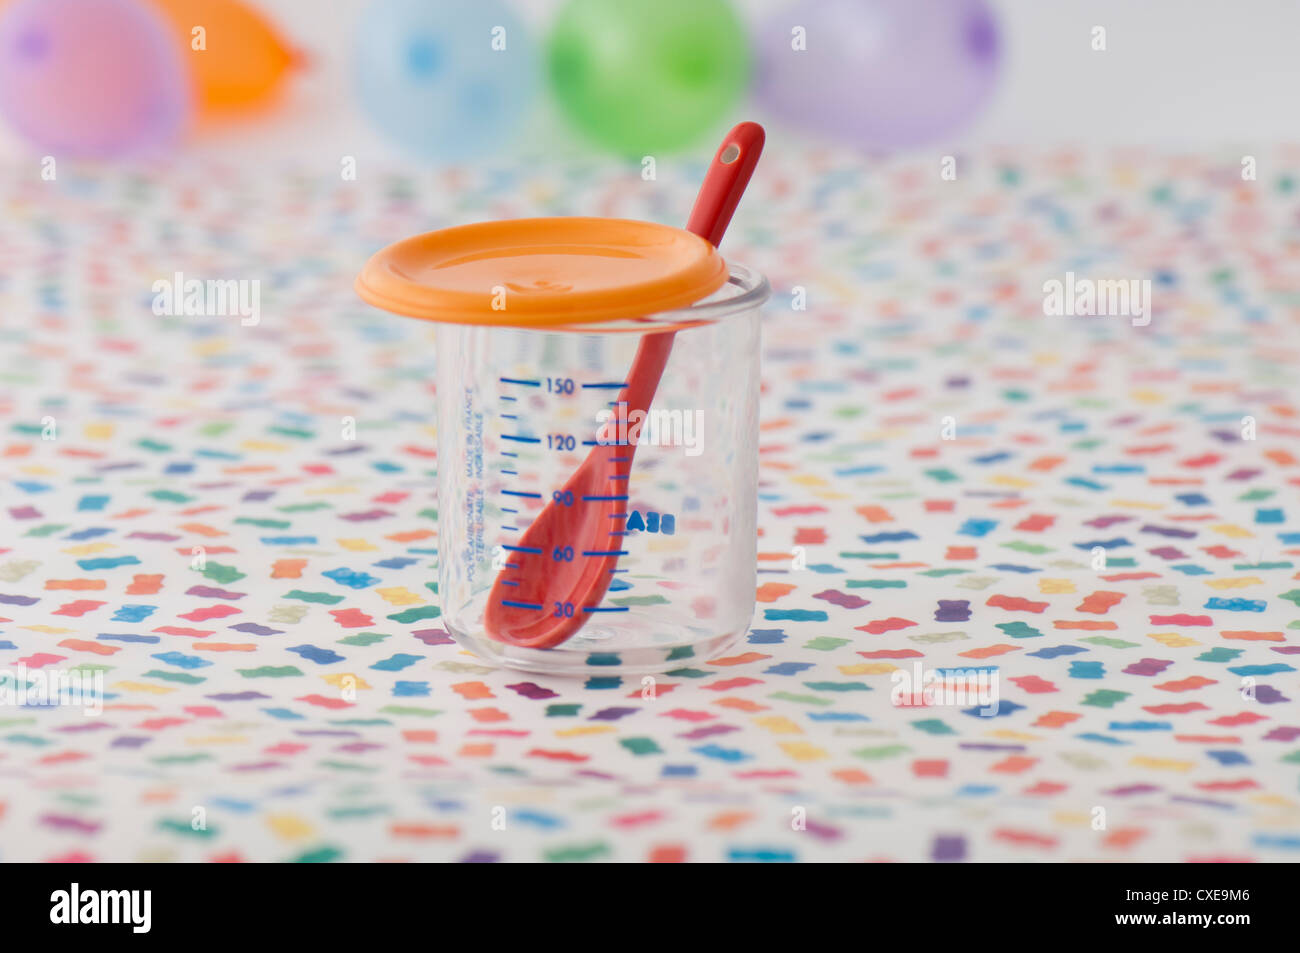 Plastic measuring cup and baby spoon Stock Photo